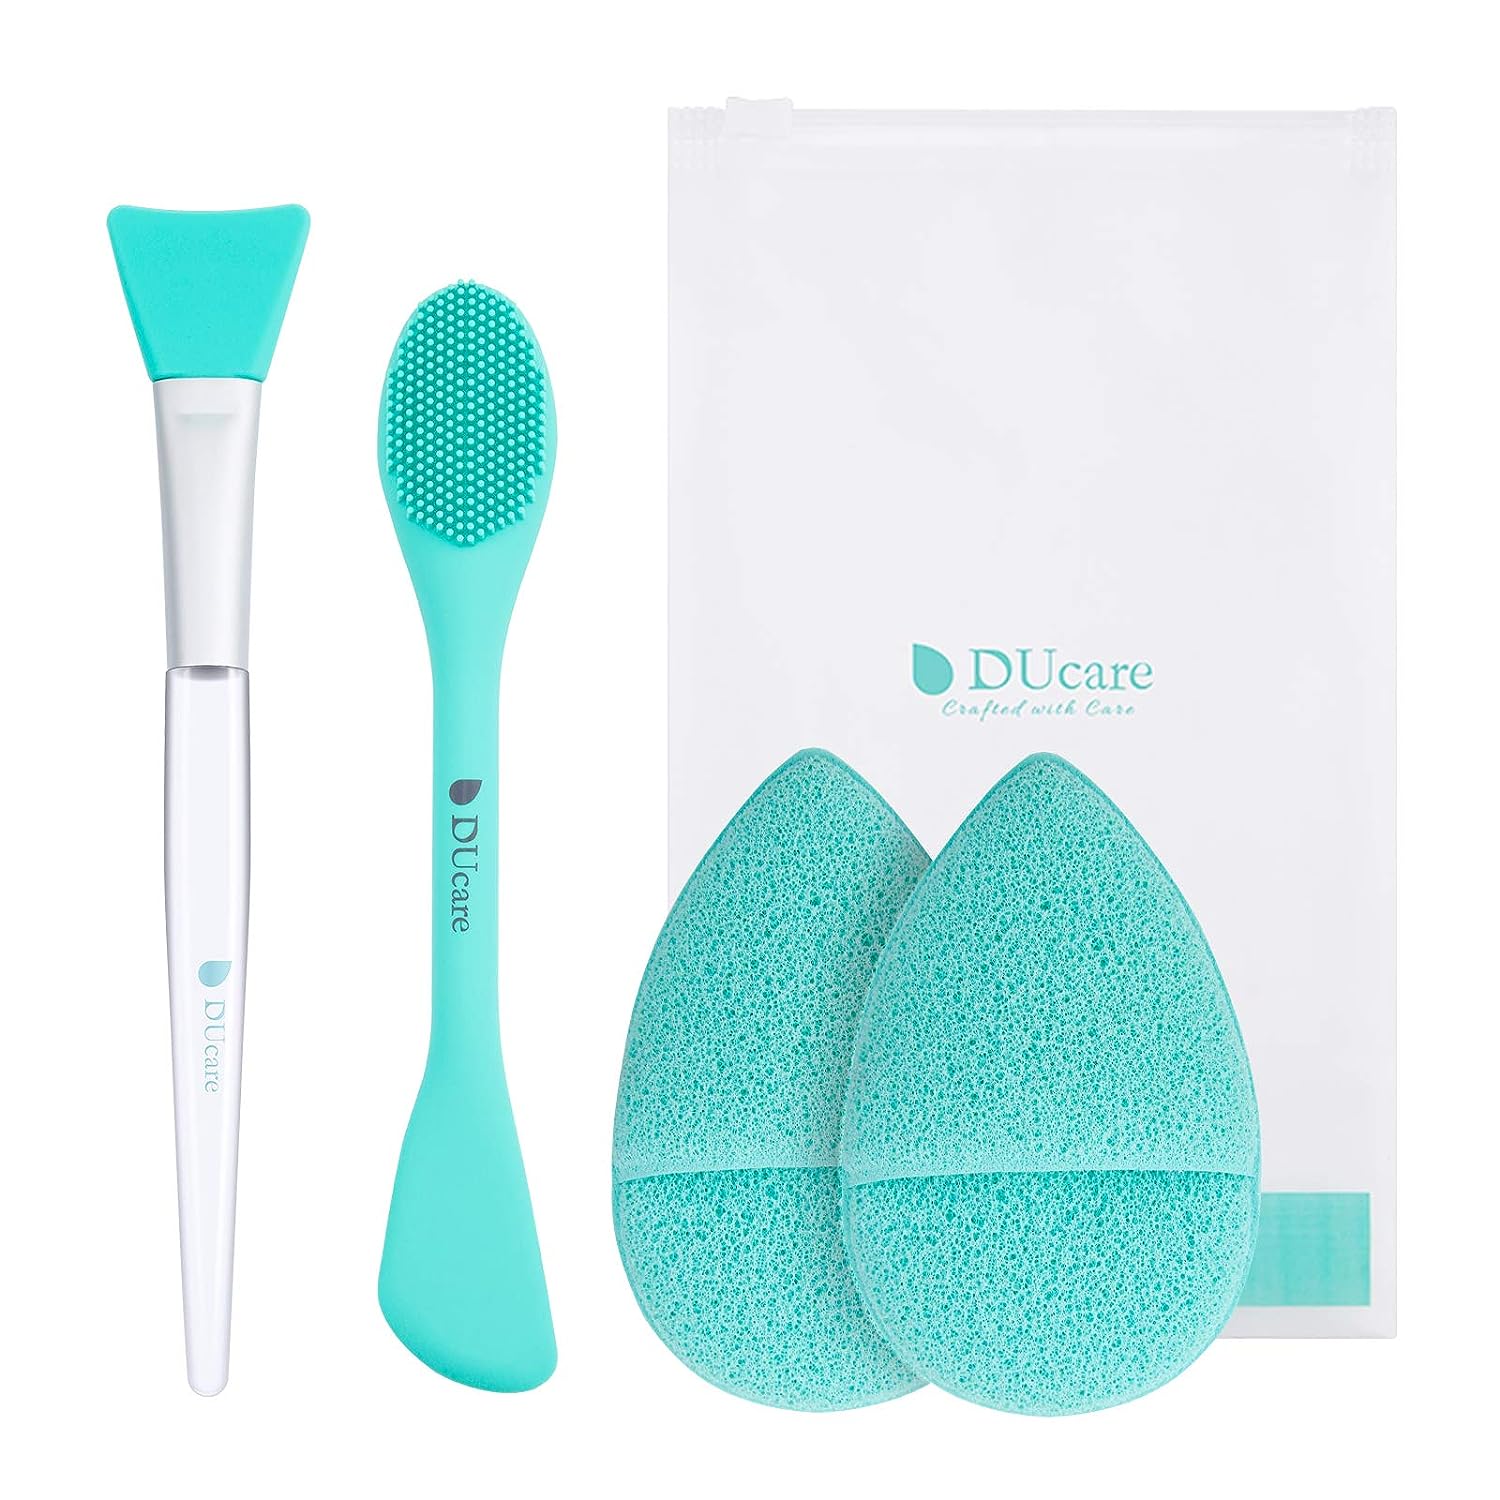 DUcare Silicone Face Mask Brush